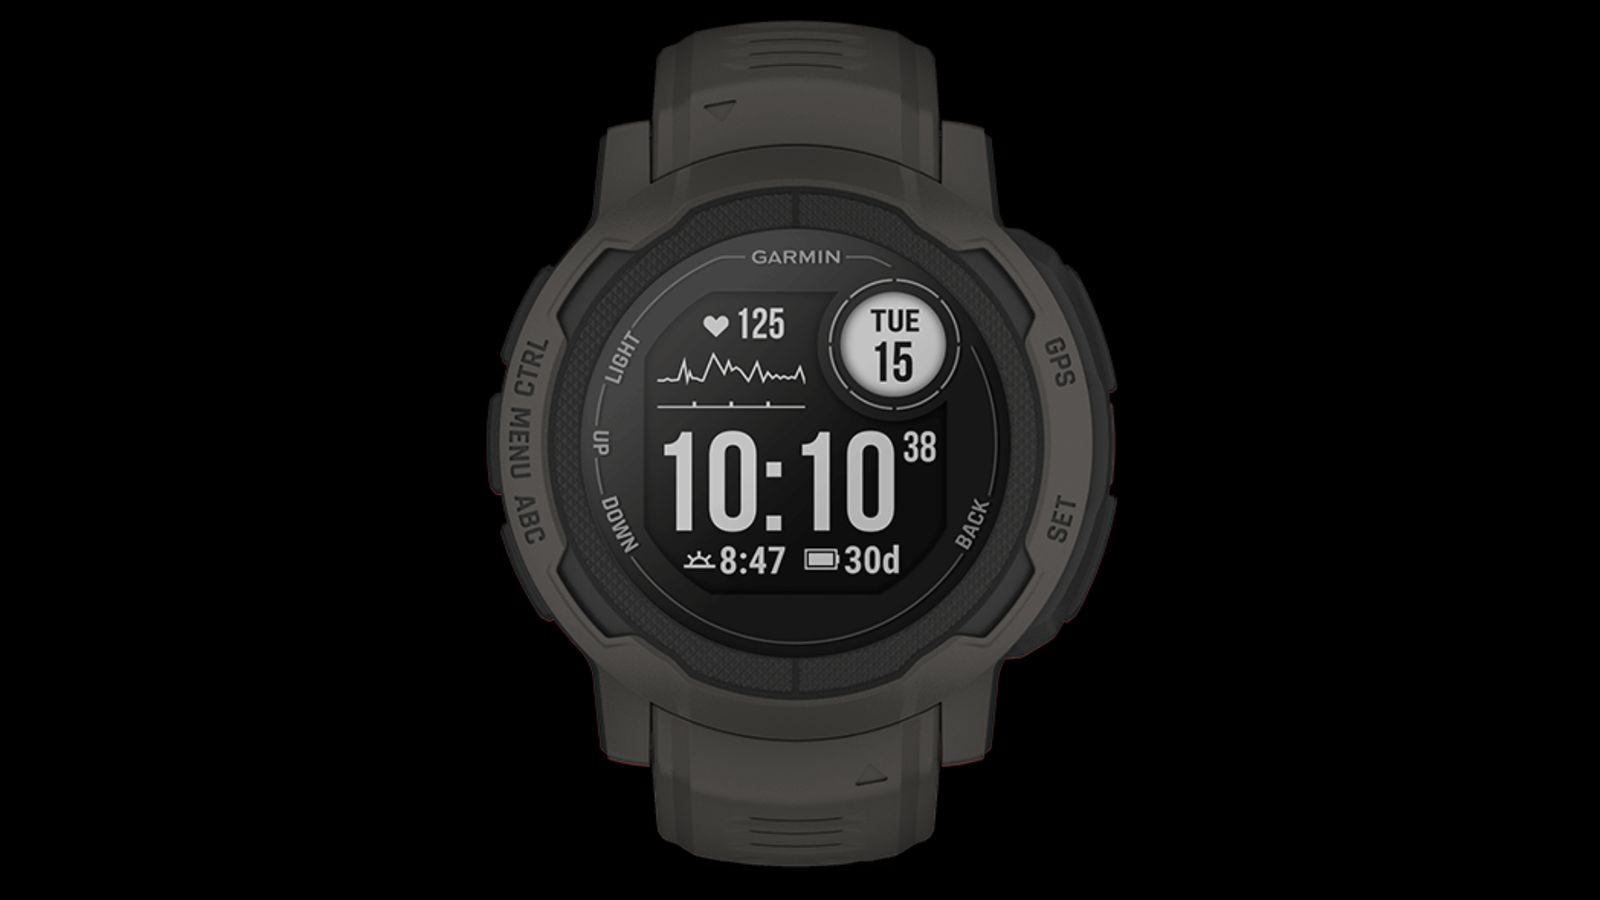 Garmin Instinct 2 Solar product image of a black smartwatch with the time 10:10 in grey on display next to the date Tue 15 and heart rate stats.